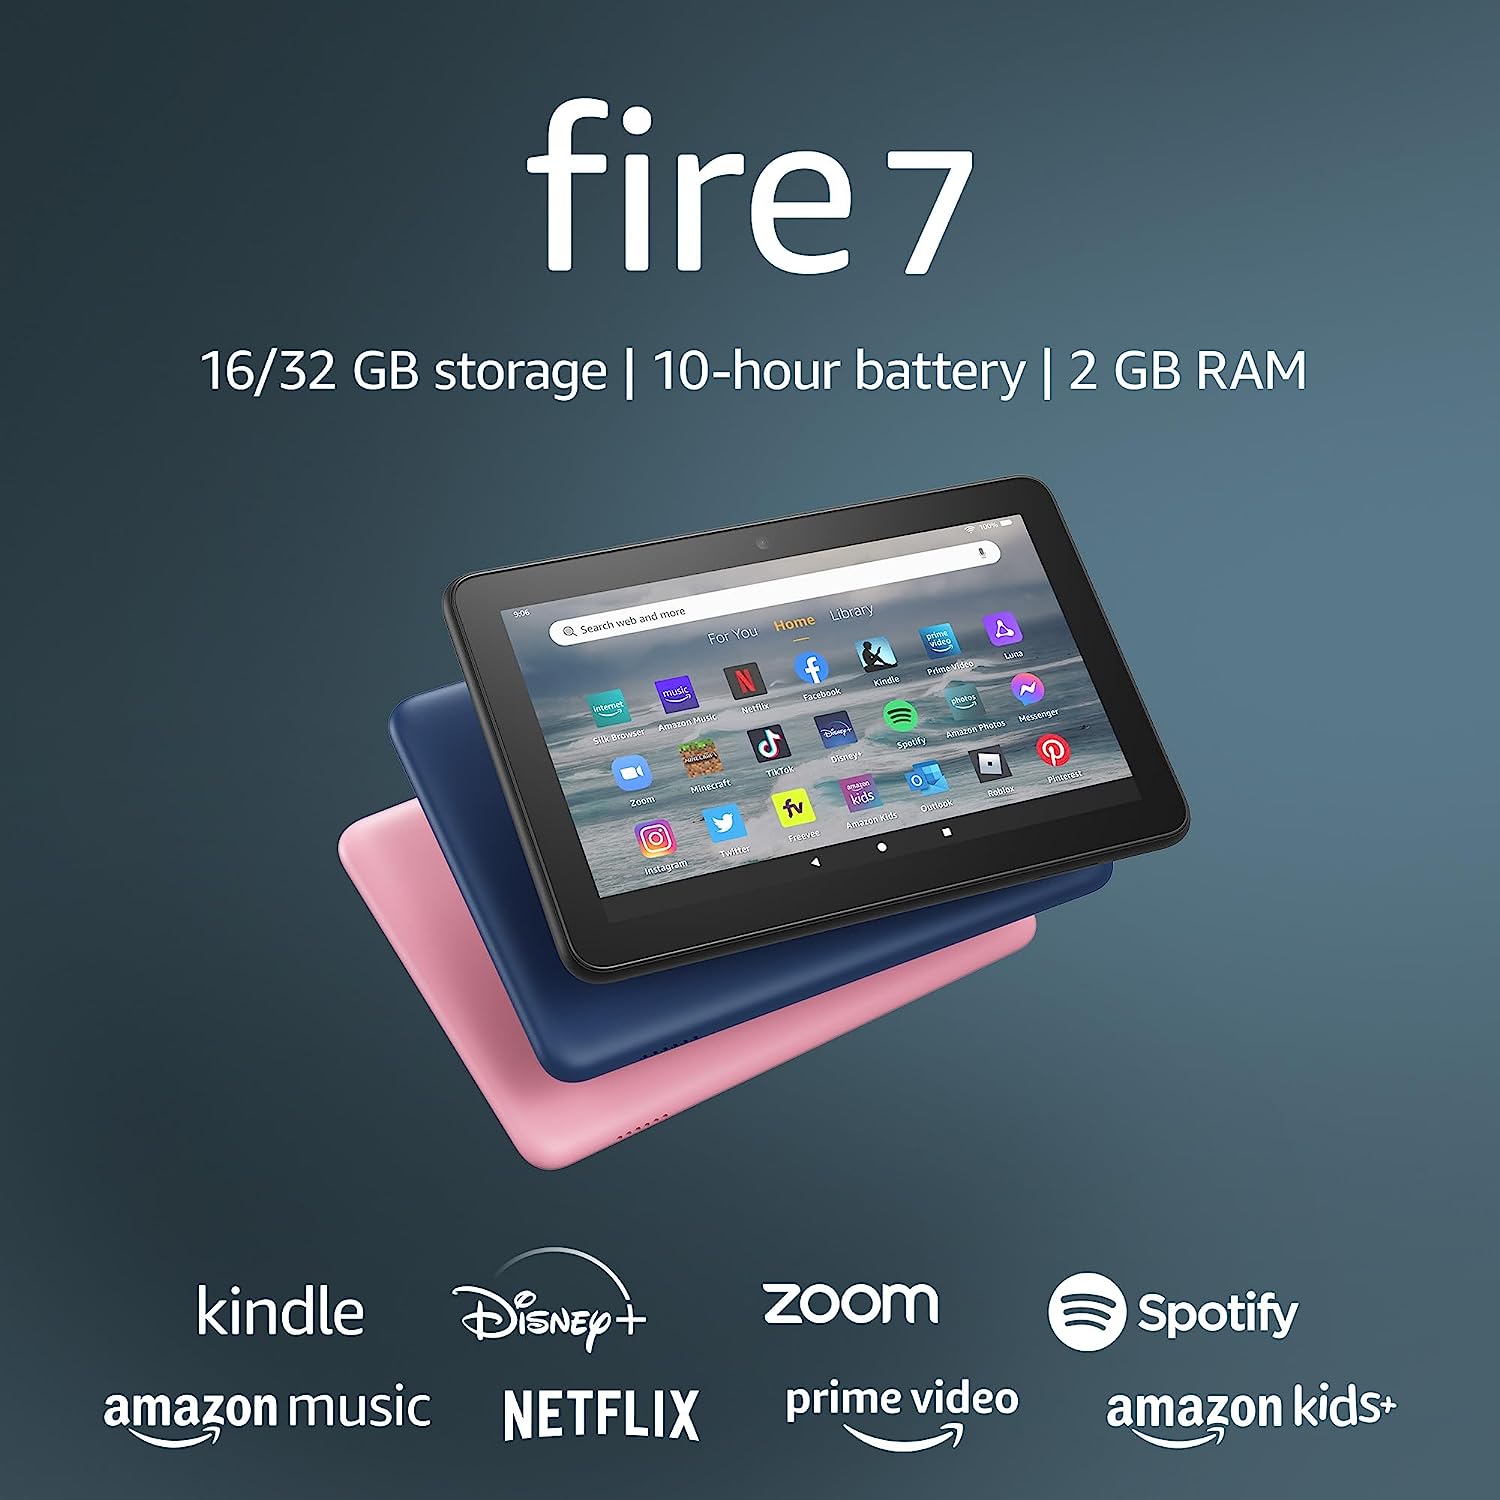 Amazon Prime Members Exclusive: 7" Amazon Fire 7 Tablet w/ 16GB Storage (Lockscreen Ad-Supported) $40 + Free Shipping